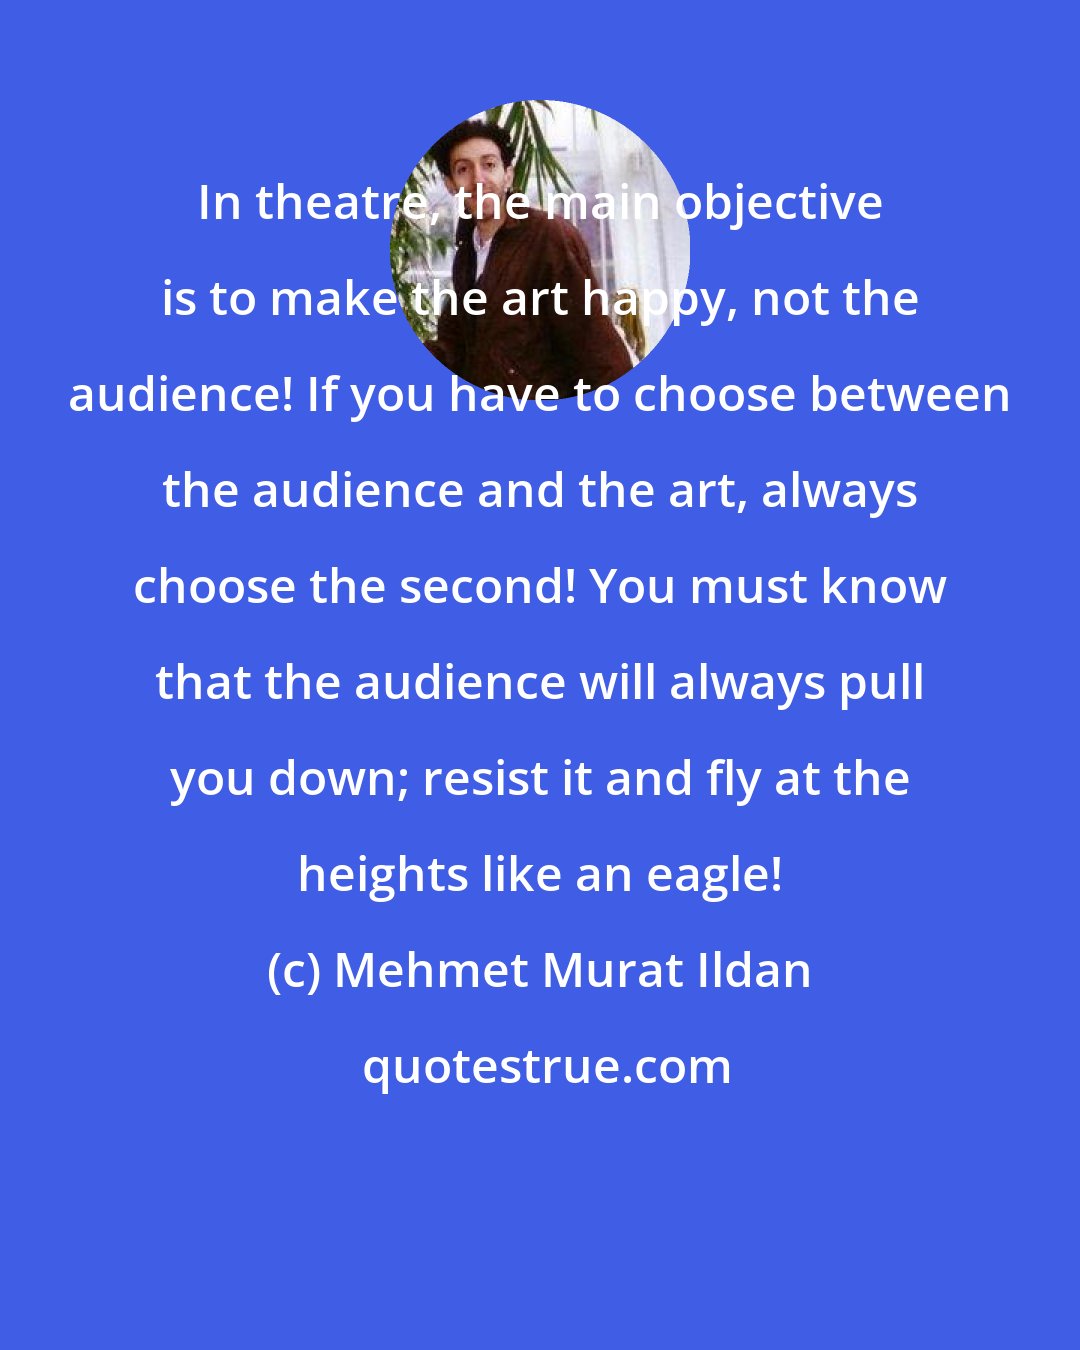 Mehmet Murat Ildan: In theatre, the main objective is to make the art happy, not the audience! If you have to choose between the audience and the art, always choose the second! You must know that the audience will always pull you down; resist it and fly at the heights like an eagle!